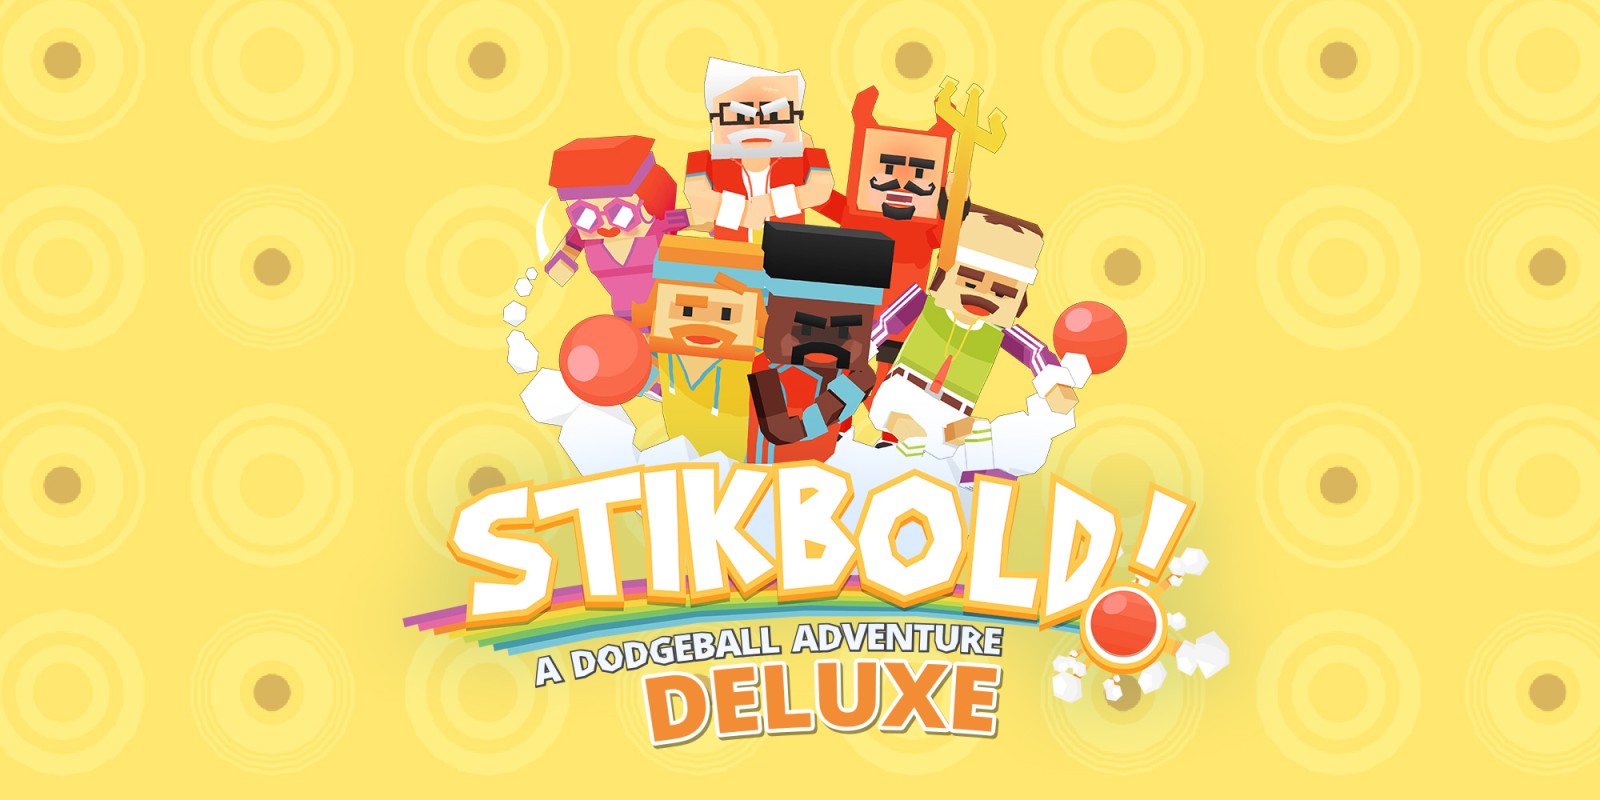 Stikbold! A Dodgeball Adventure DELUXE